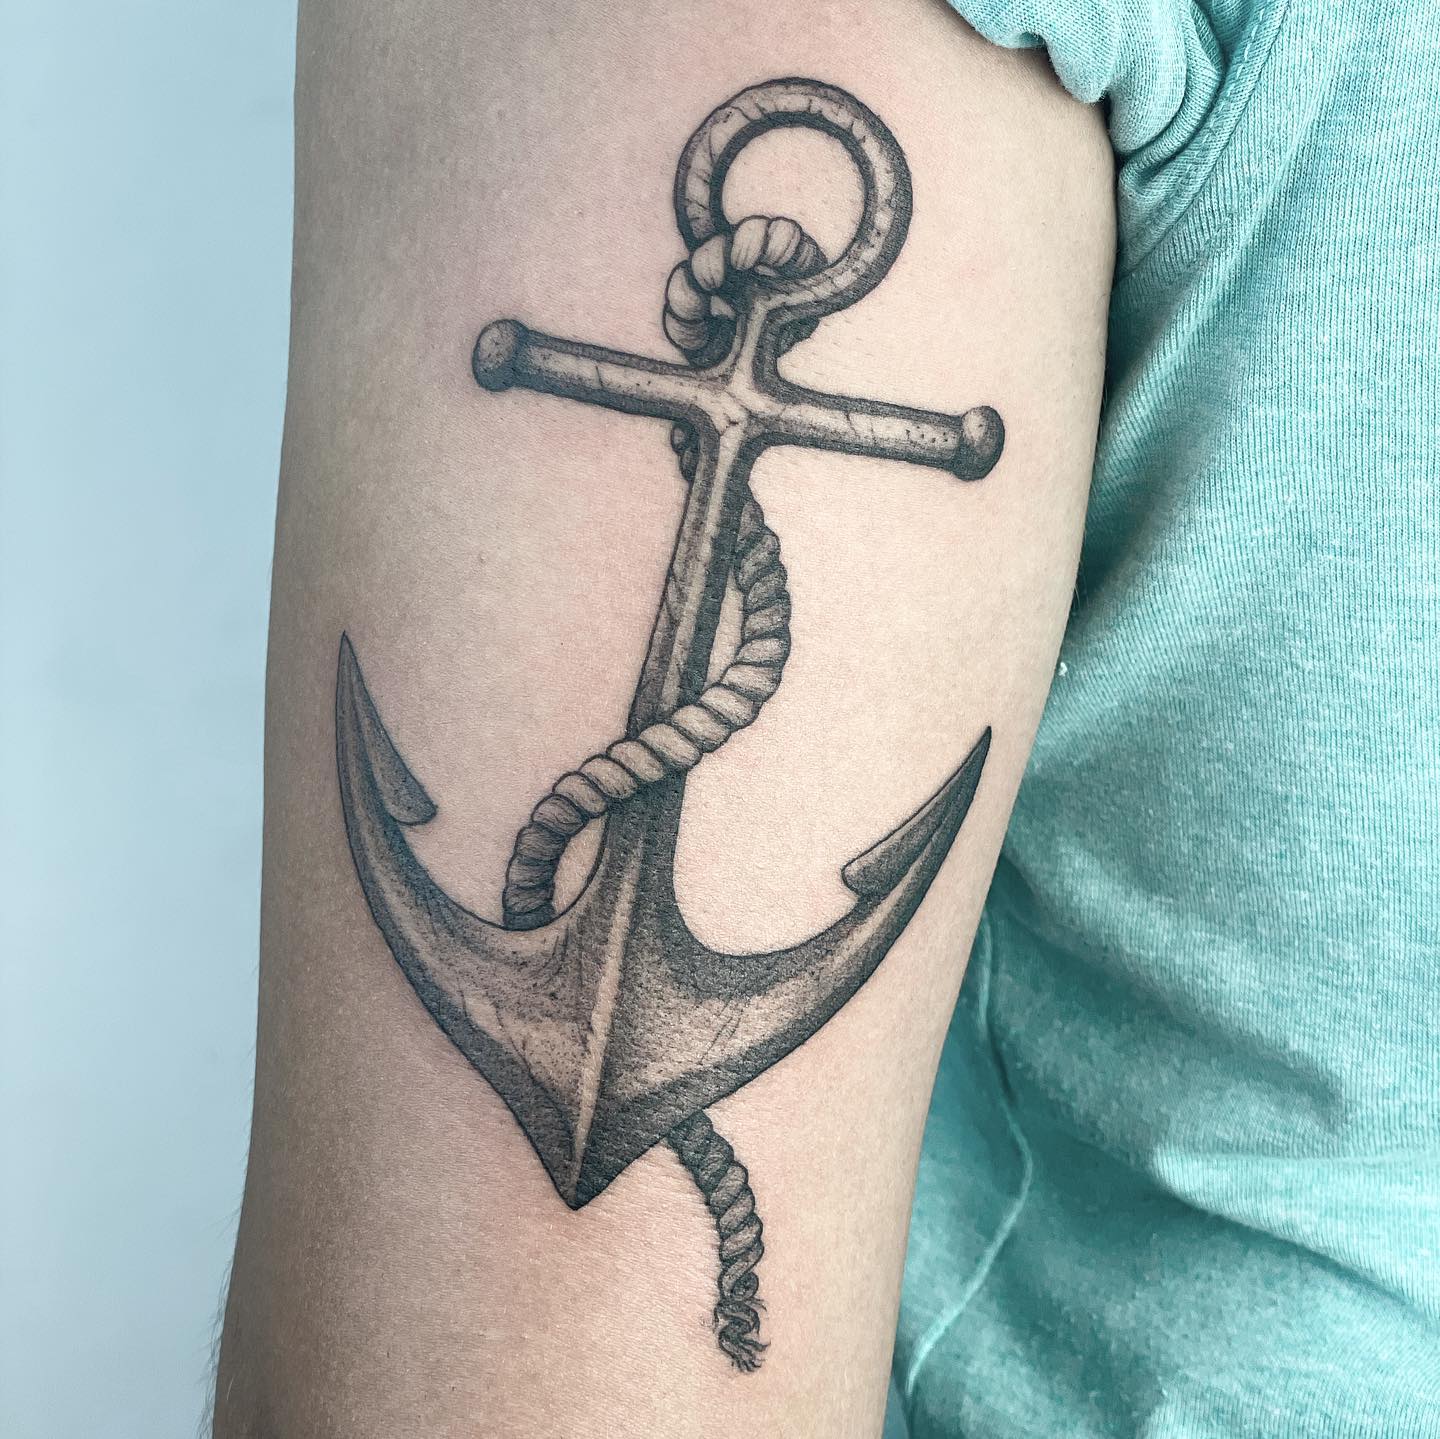 The one above is a cool tattoo to look at. To show your love of sea, an anchor tattoo is one of the best options.